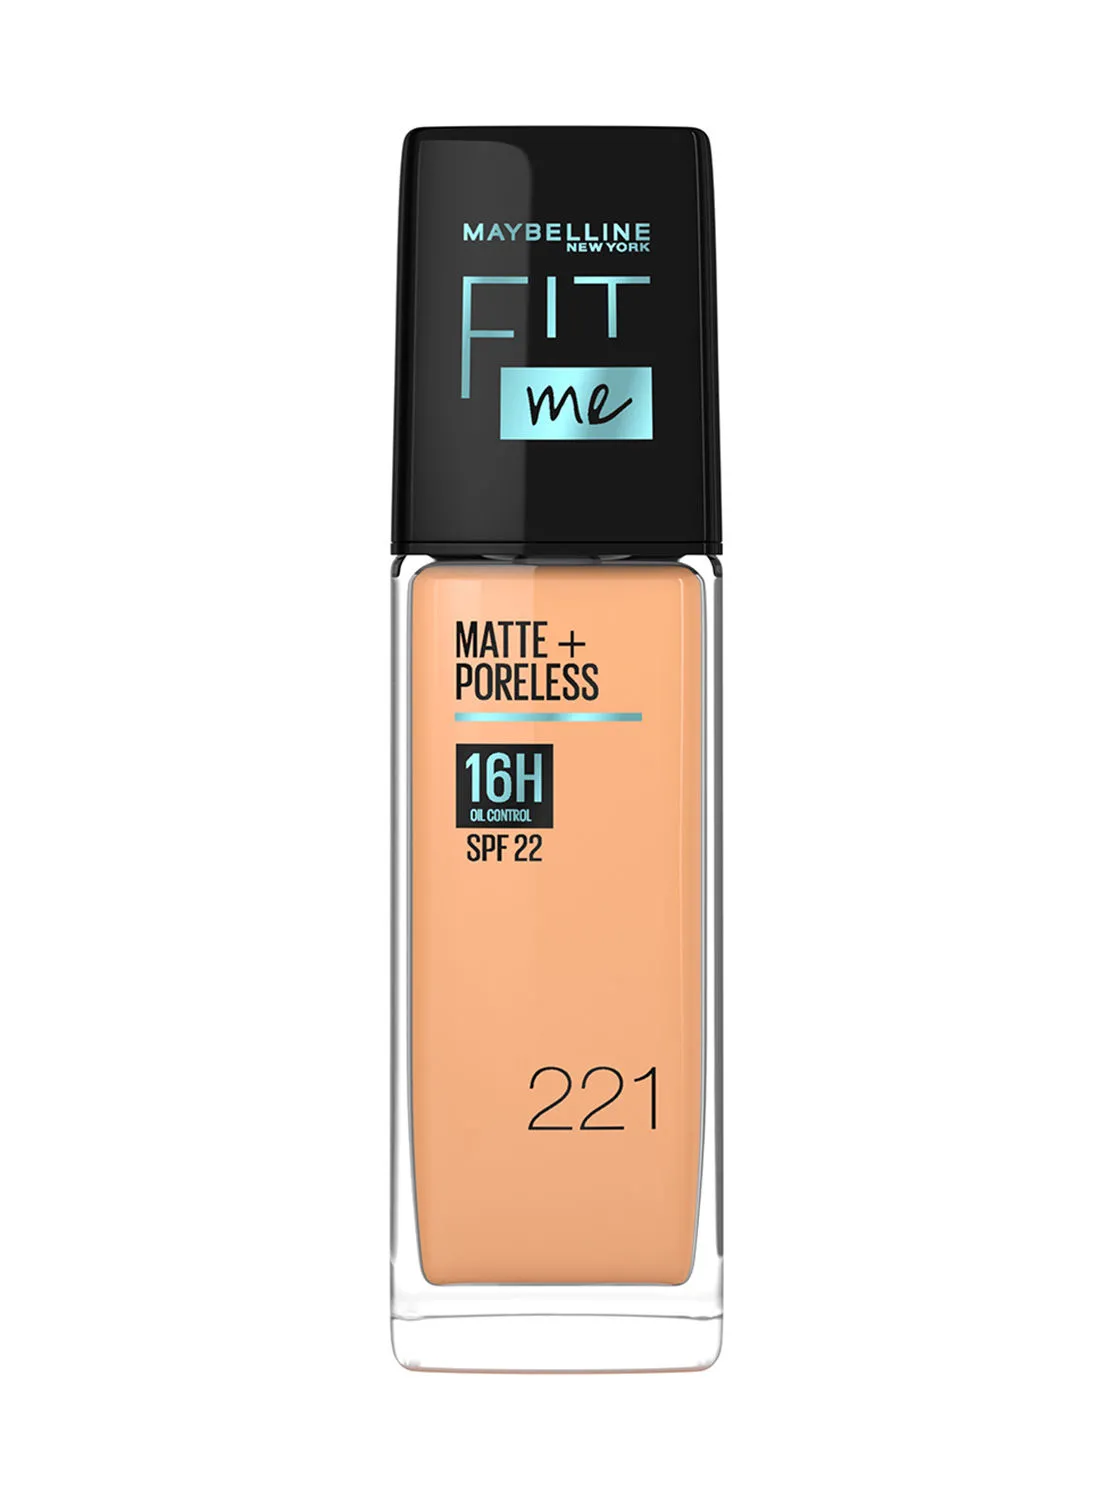 MAYBELLINE NEW YORK Maybelline New York Fit Me Matte & Poreless Foundation 16H Oil Control with SPF 22 - 221